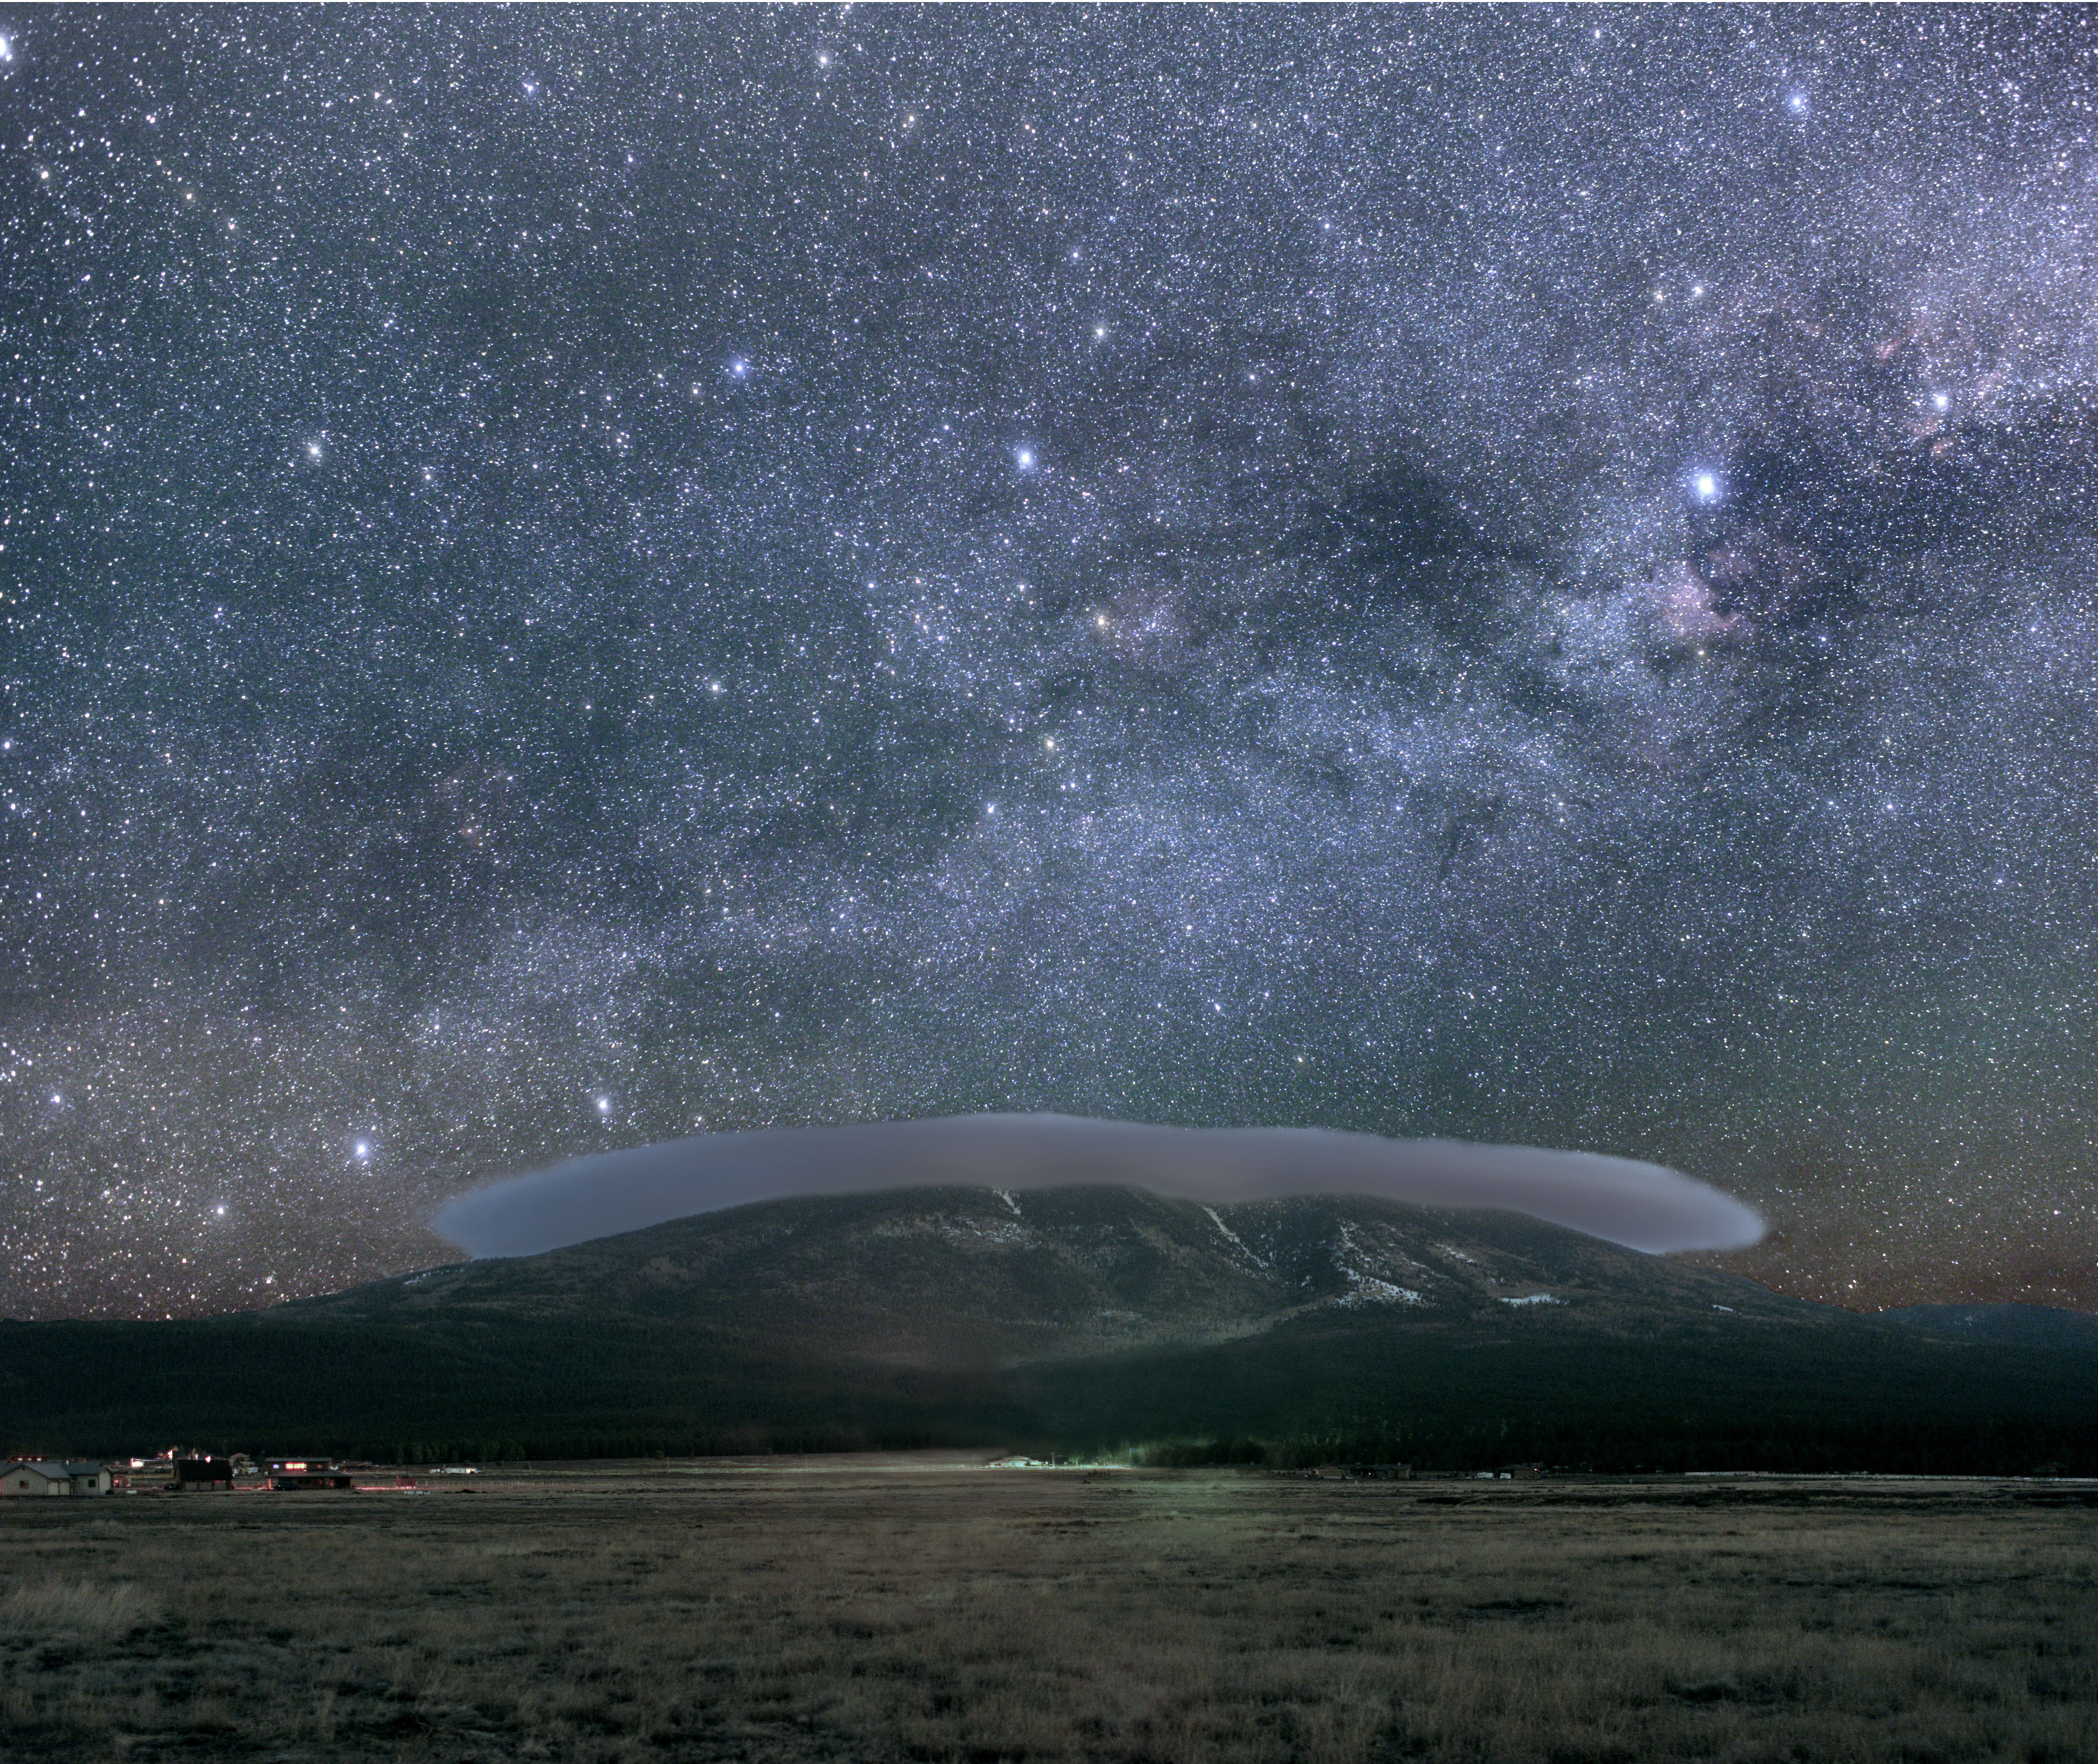 APOD: 2008 April 16 - A Protected Night Sky Over Flagstaff4153 x 3492